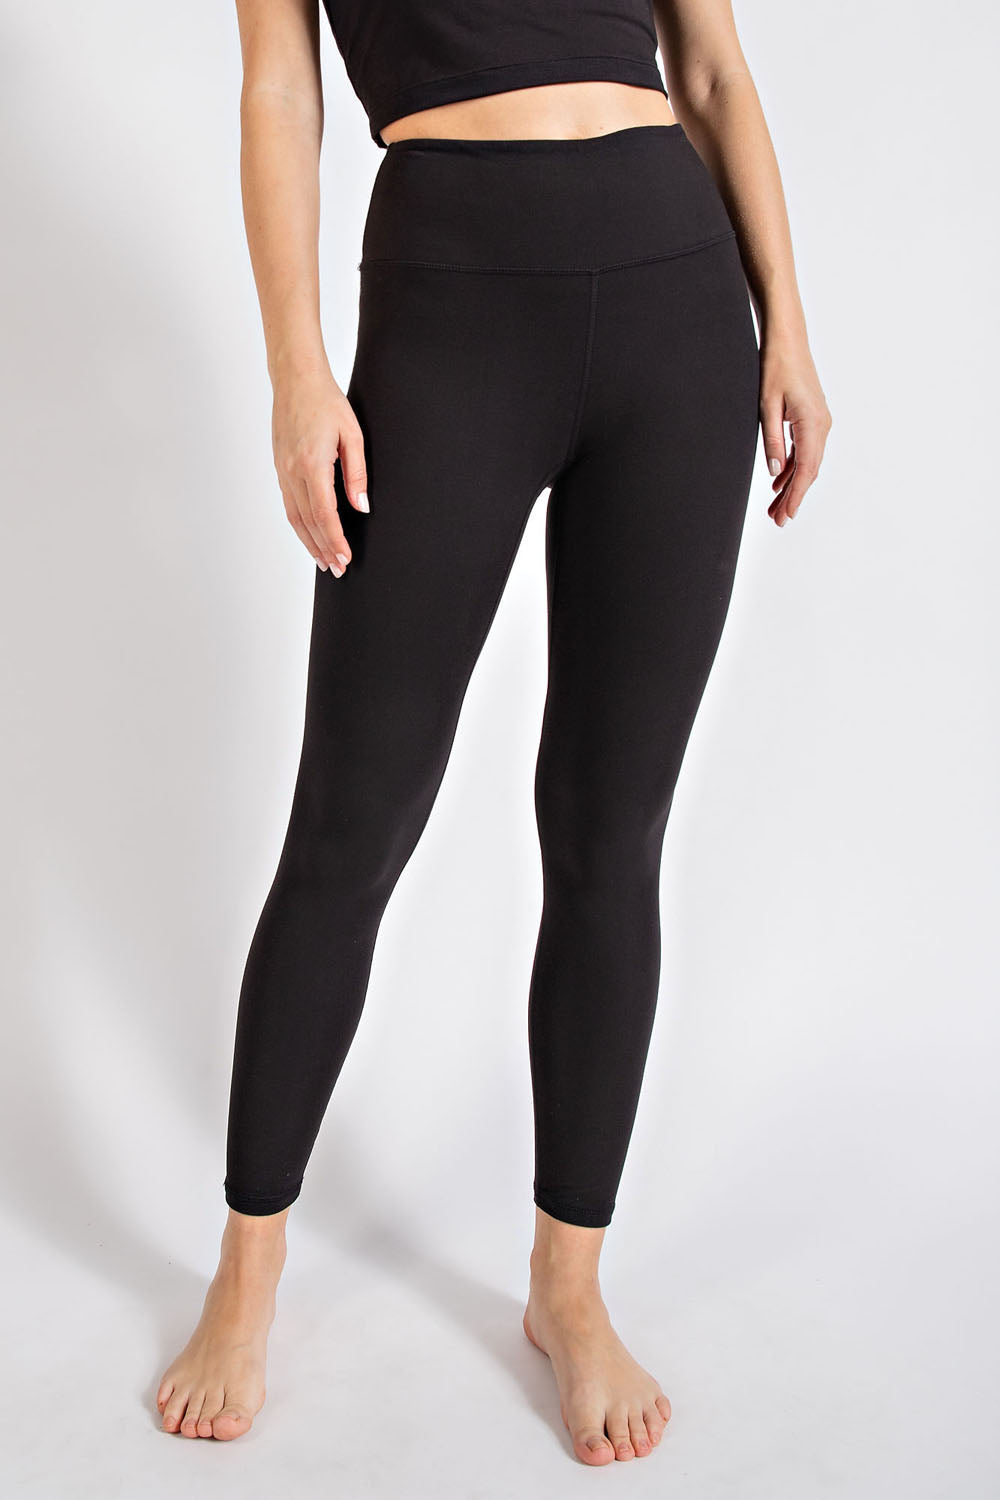 Titanium Buttery Soft Leggings with Pockets – Wild Harmony Boutique